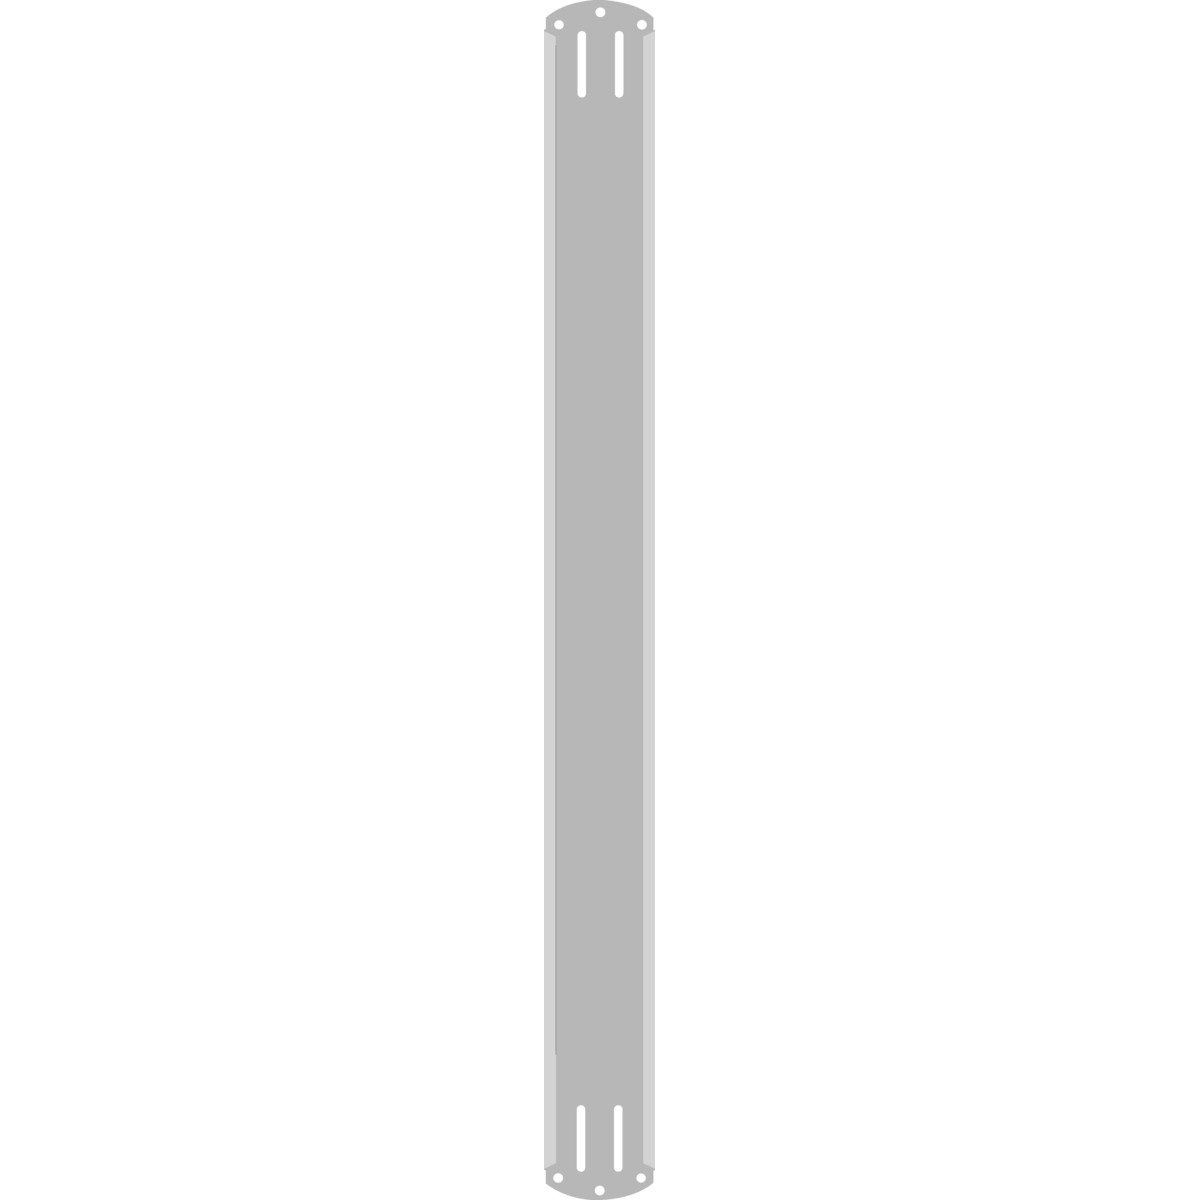 2" Vertical Character  Aluminum Holder - Fits 6 Characters